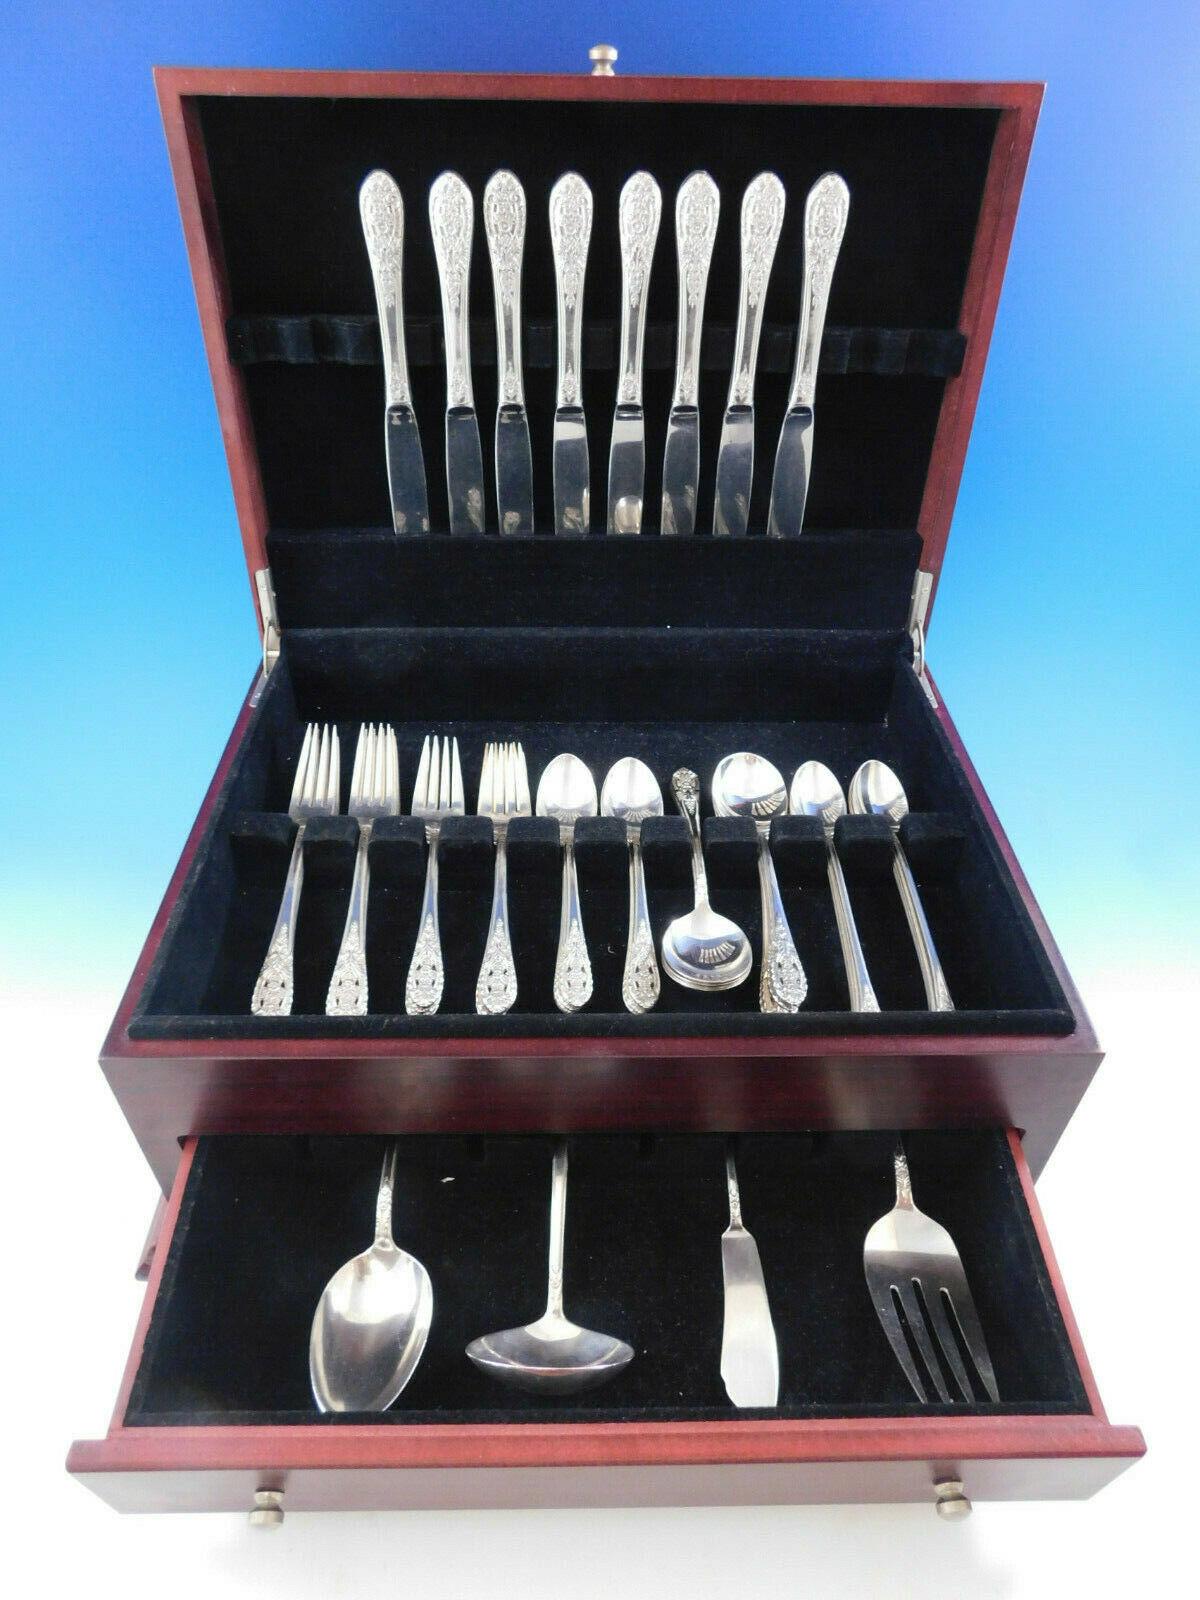 Crown princess by International sterling silver flatware set, 52 pieces with unique pierced floral handles. This set includes:

8 knives, 9 1/4